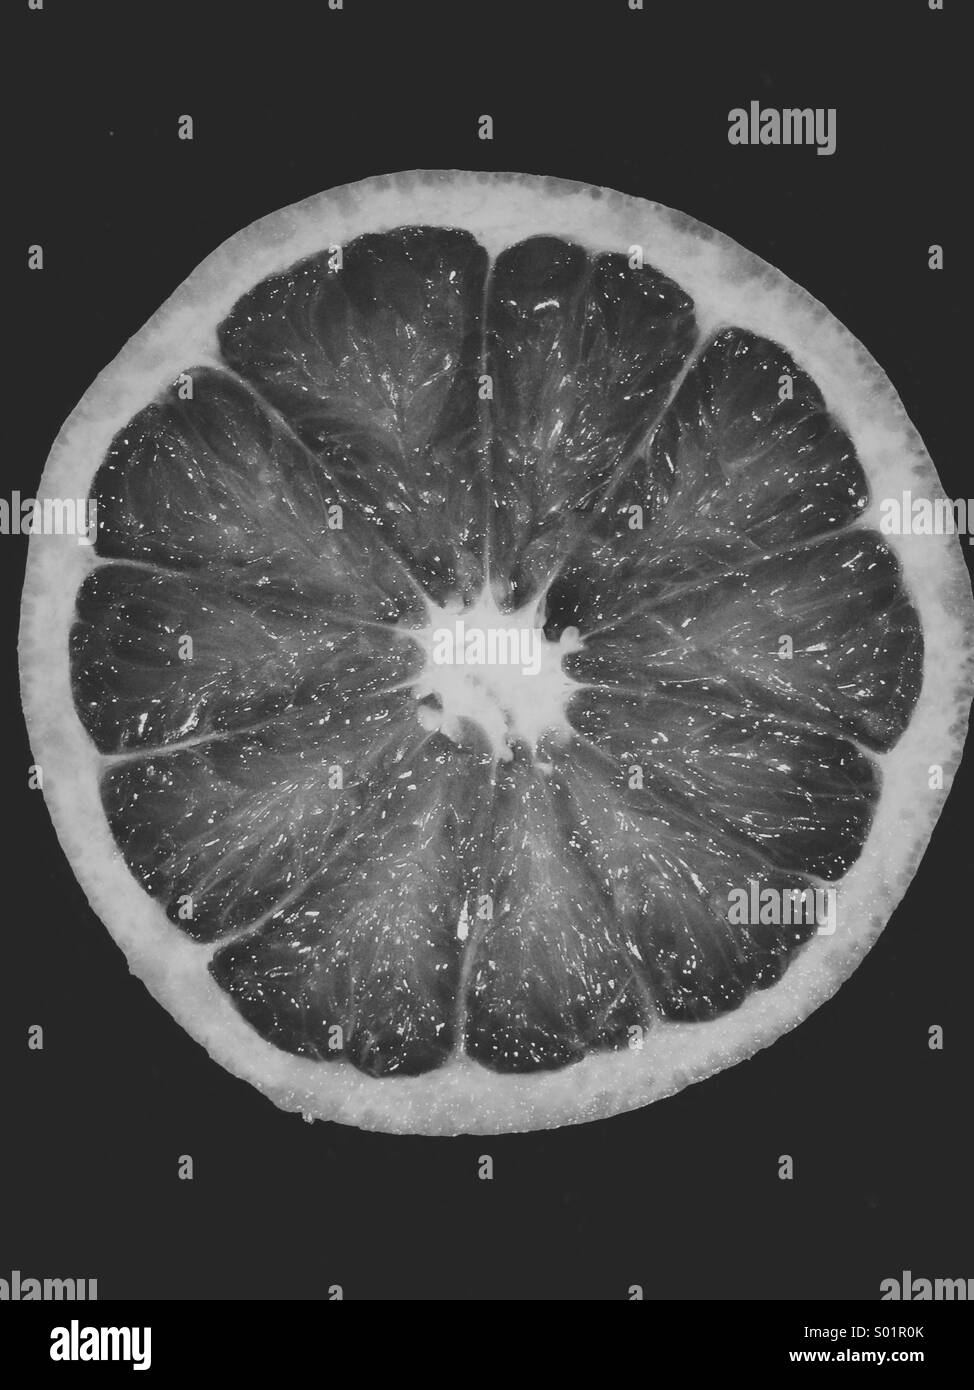 Cross section of a pink grapefruit in black and white. Stock Photo